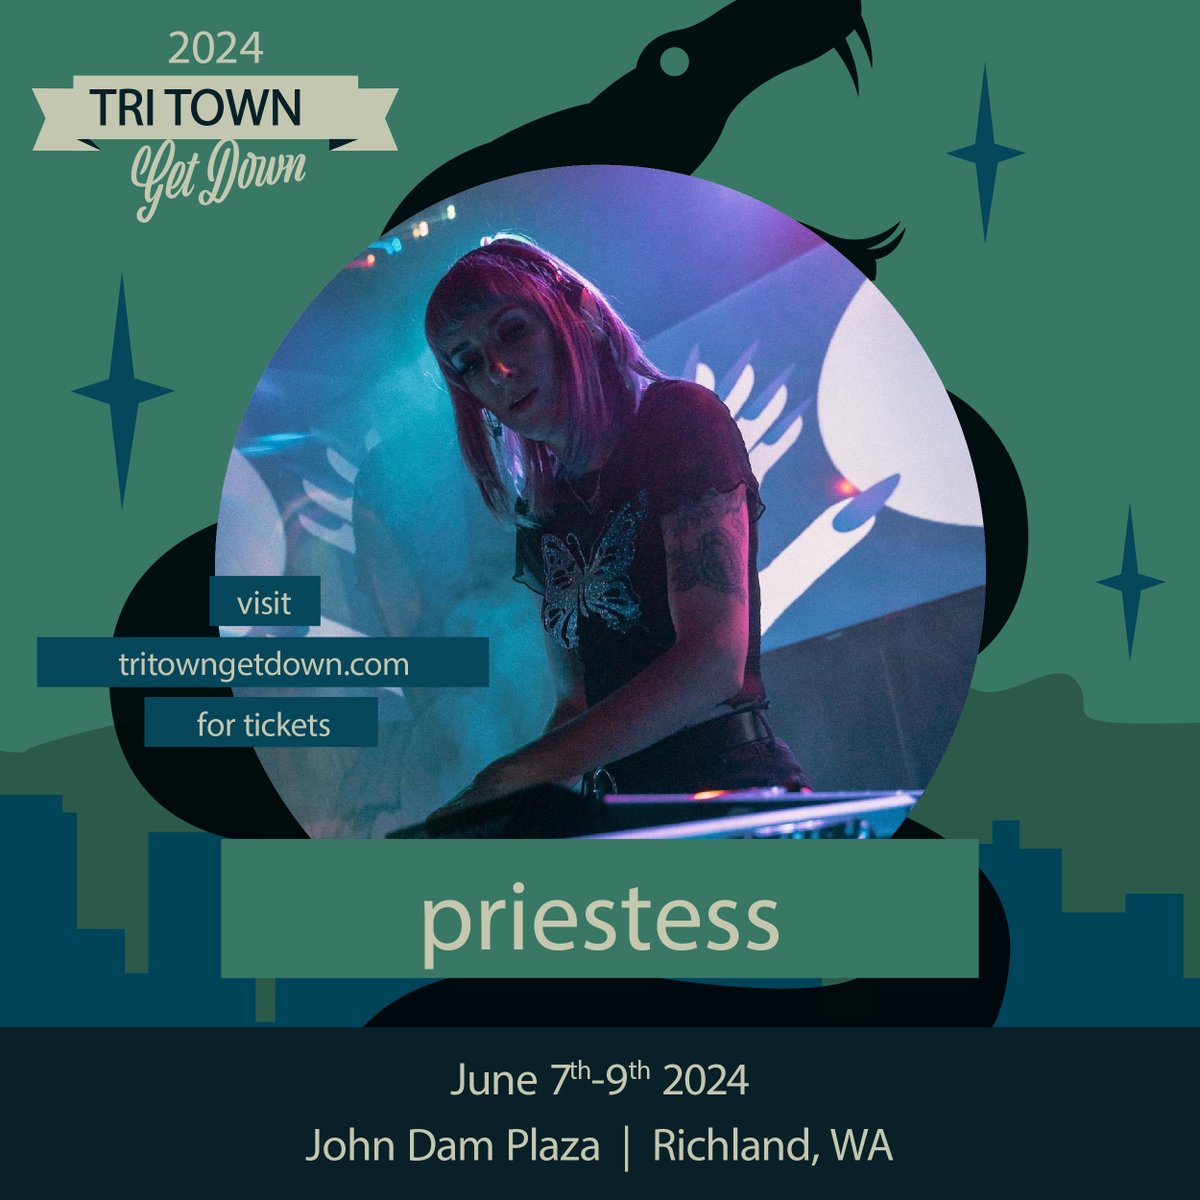 TRI TOWN GET DOWN: DJ who grew up in Tri-Cities returns for music festival the second year in a row.

by Karlee Van De Venter

'Lofton wants her sets this year to showcase the growth she’s had since last year’s festival.'

#music #localevents

tumbleweird.org/dj-returns-for…